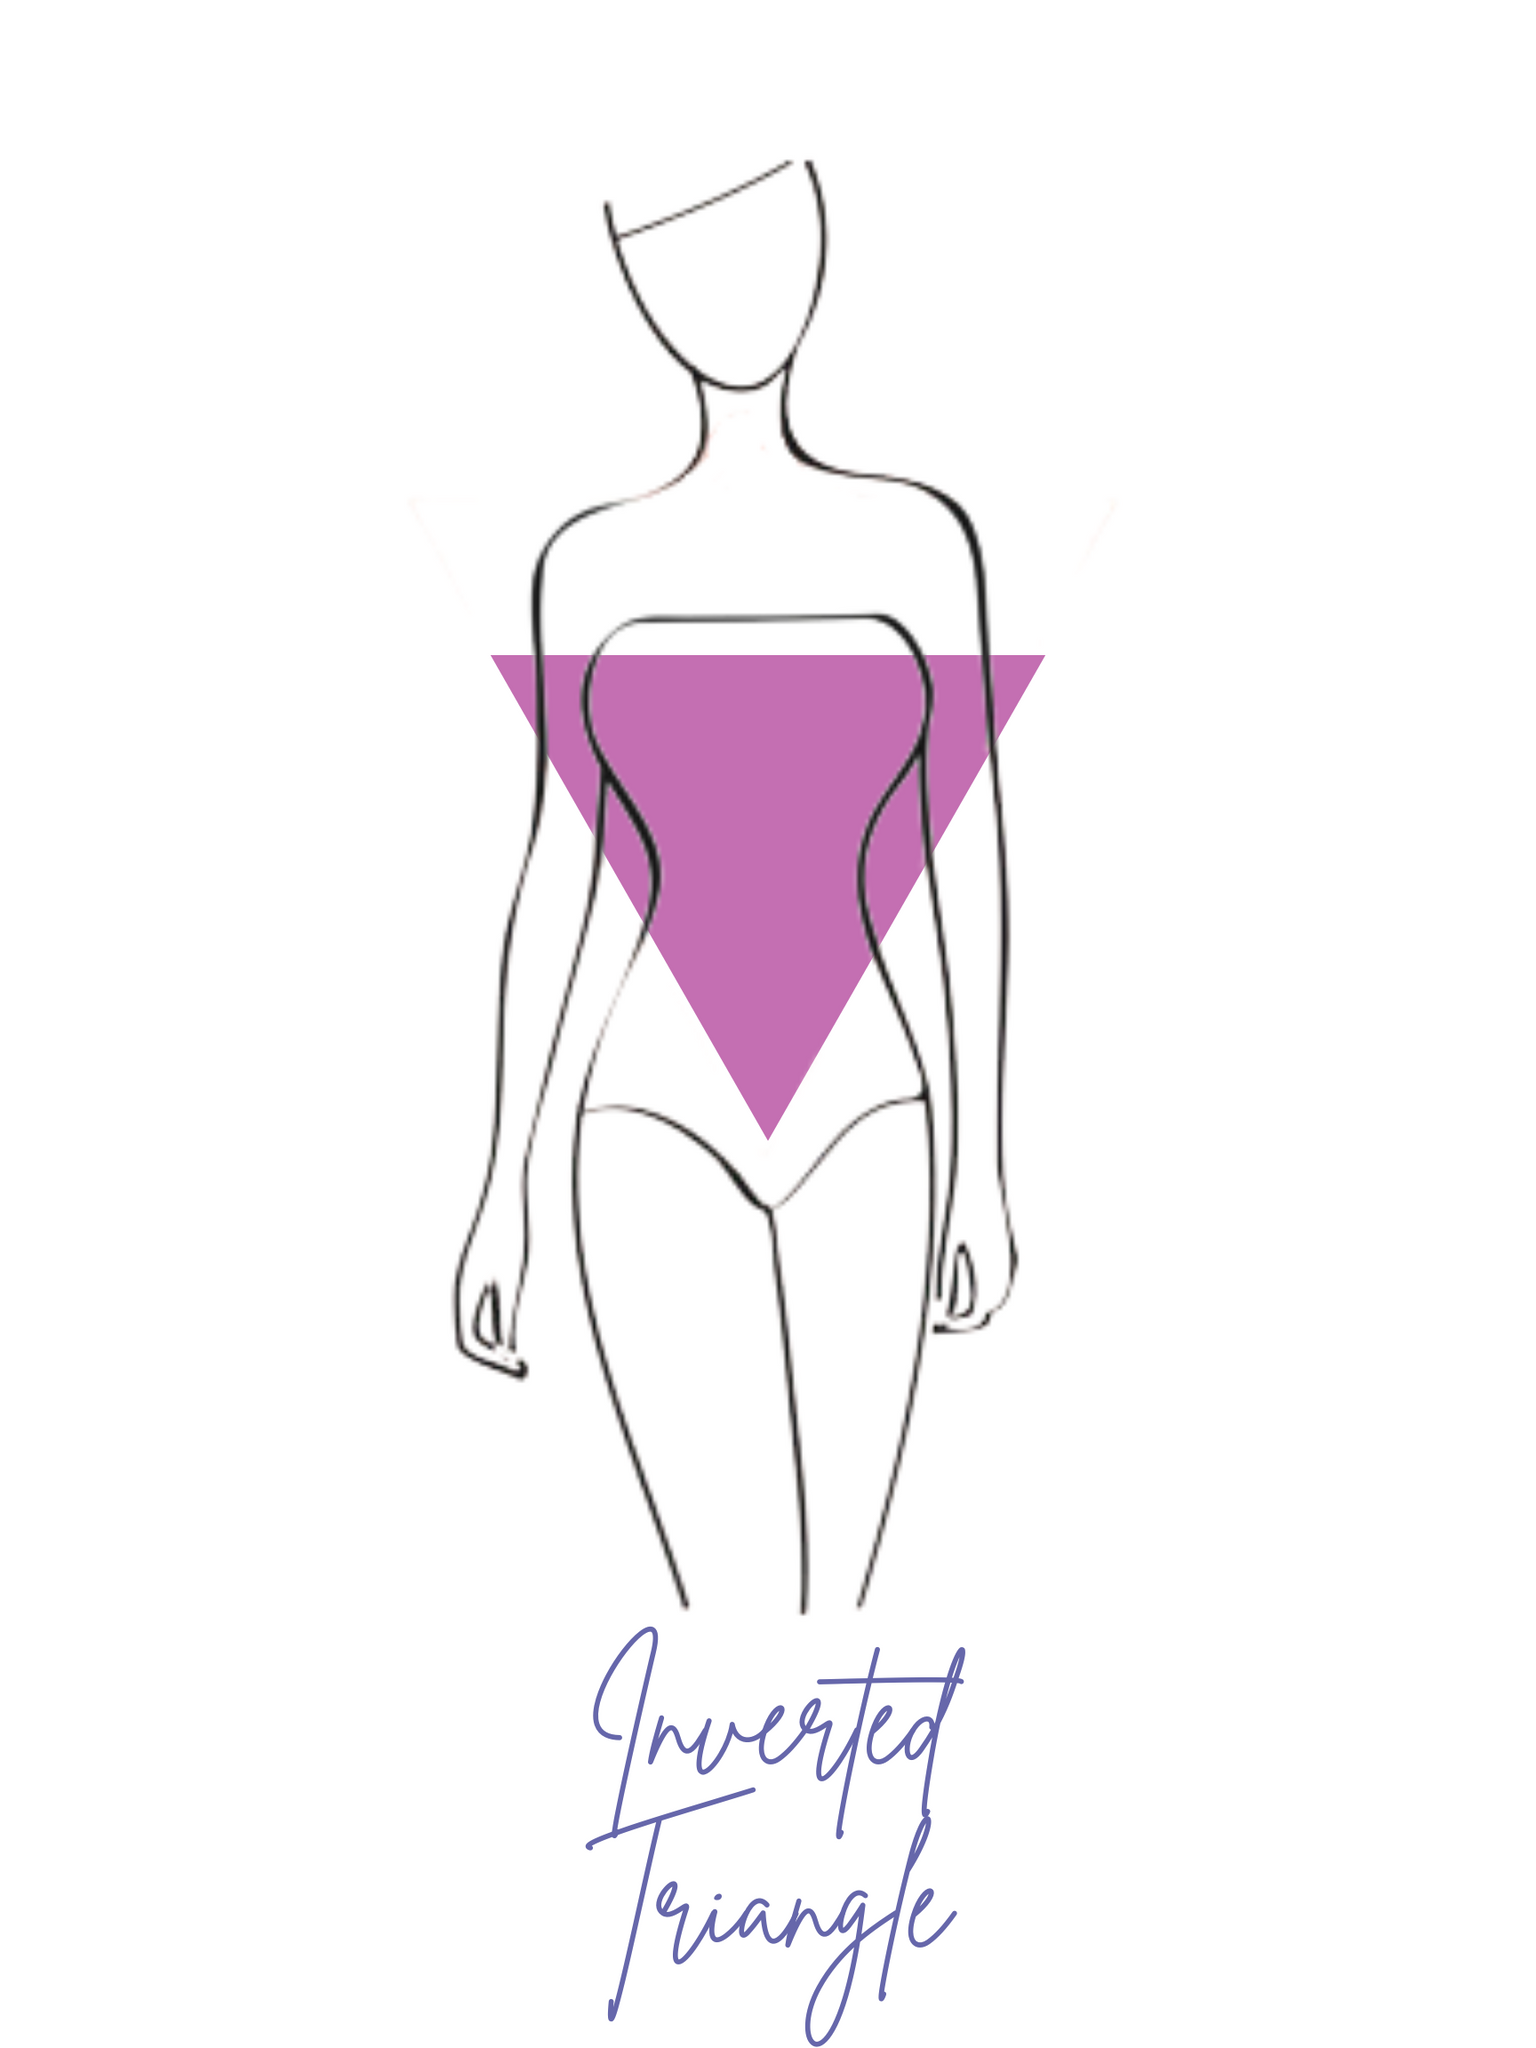 Shape/Silhouette: Inverted Triangle